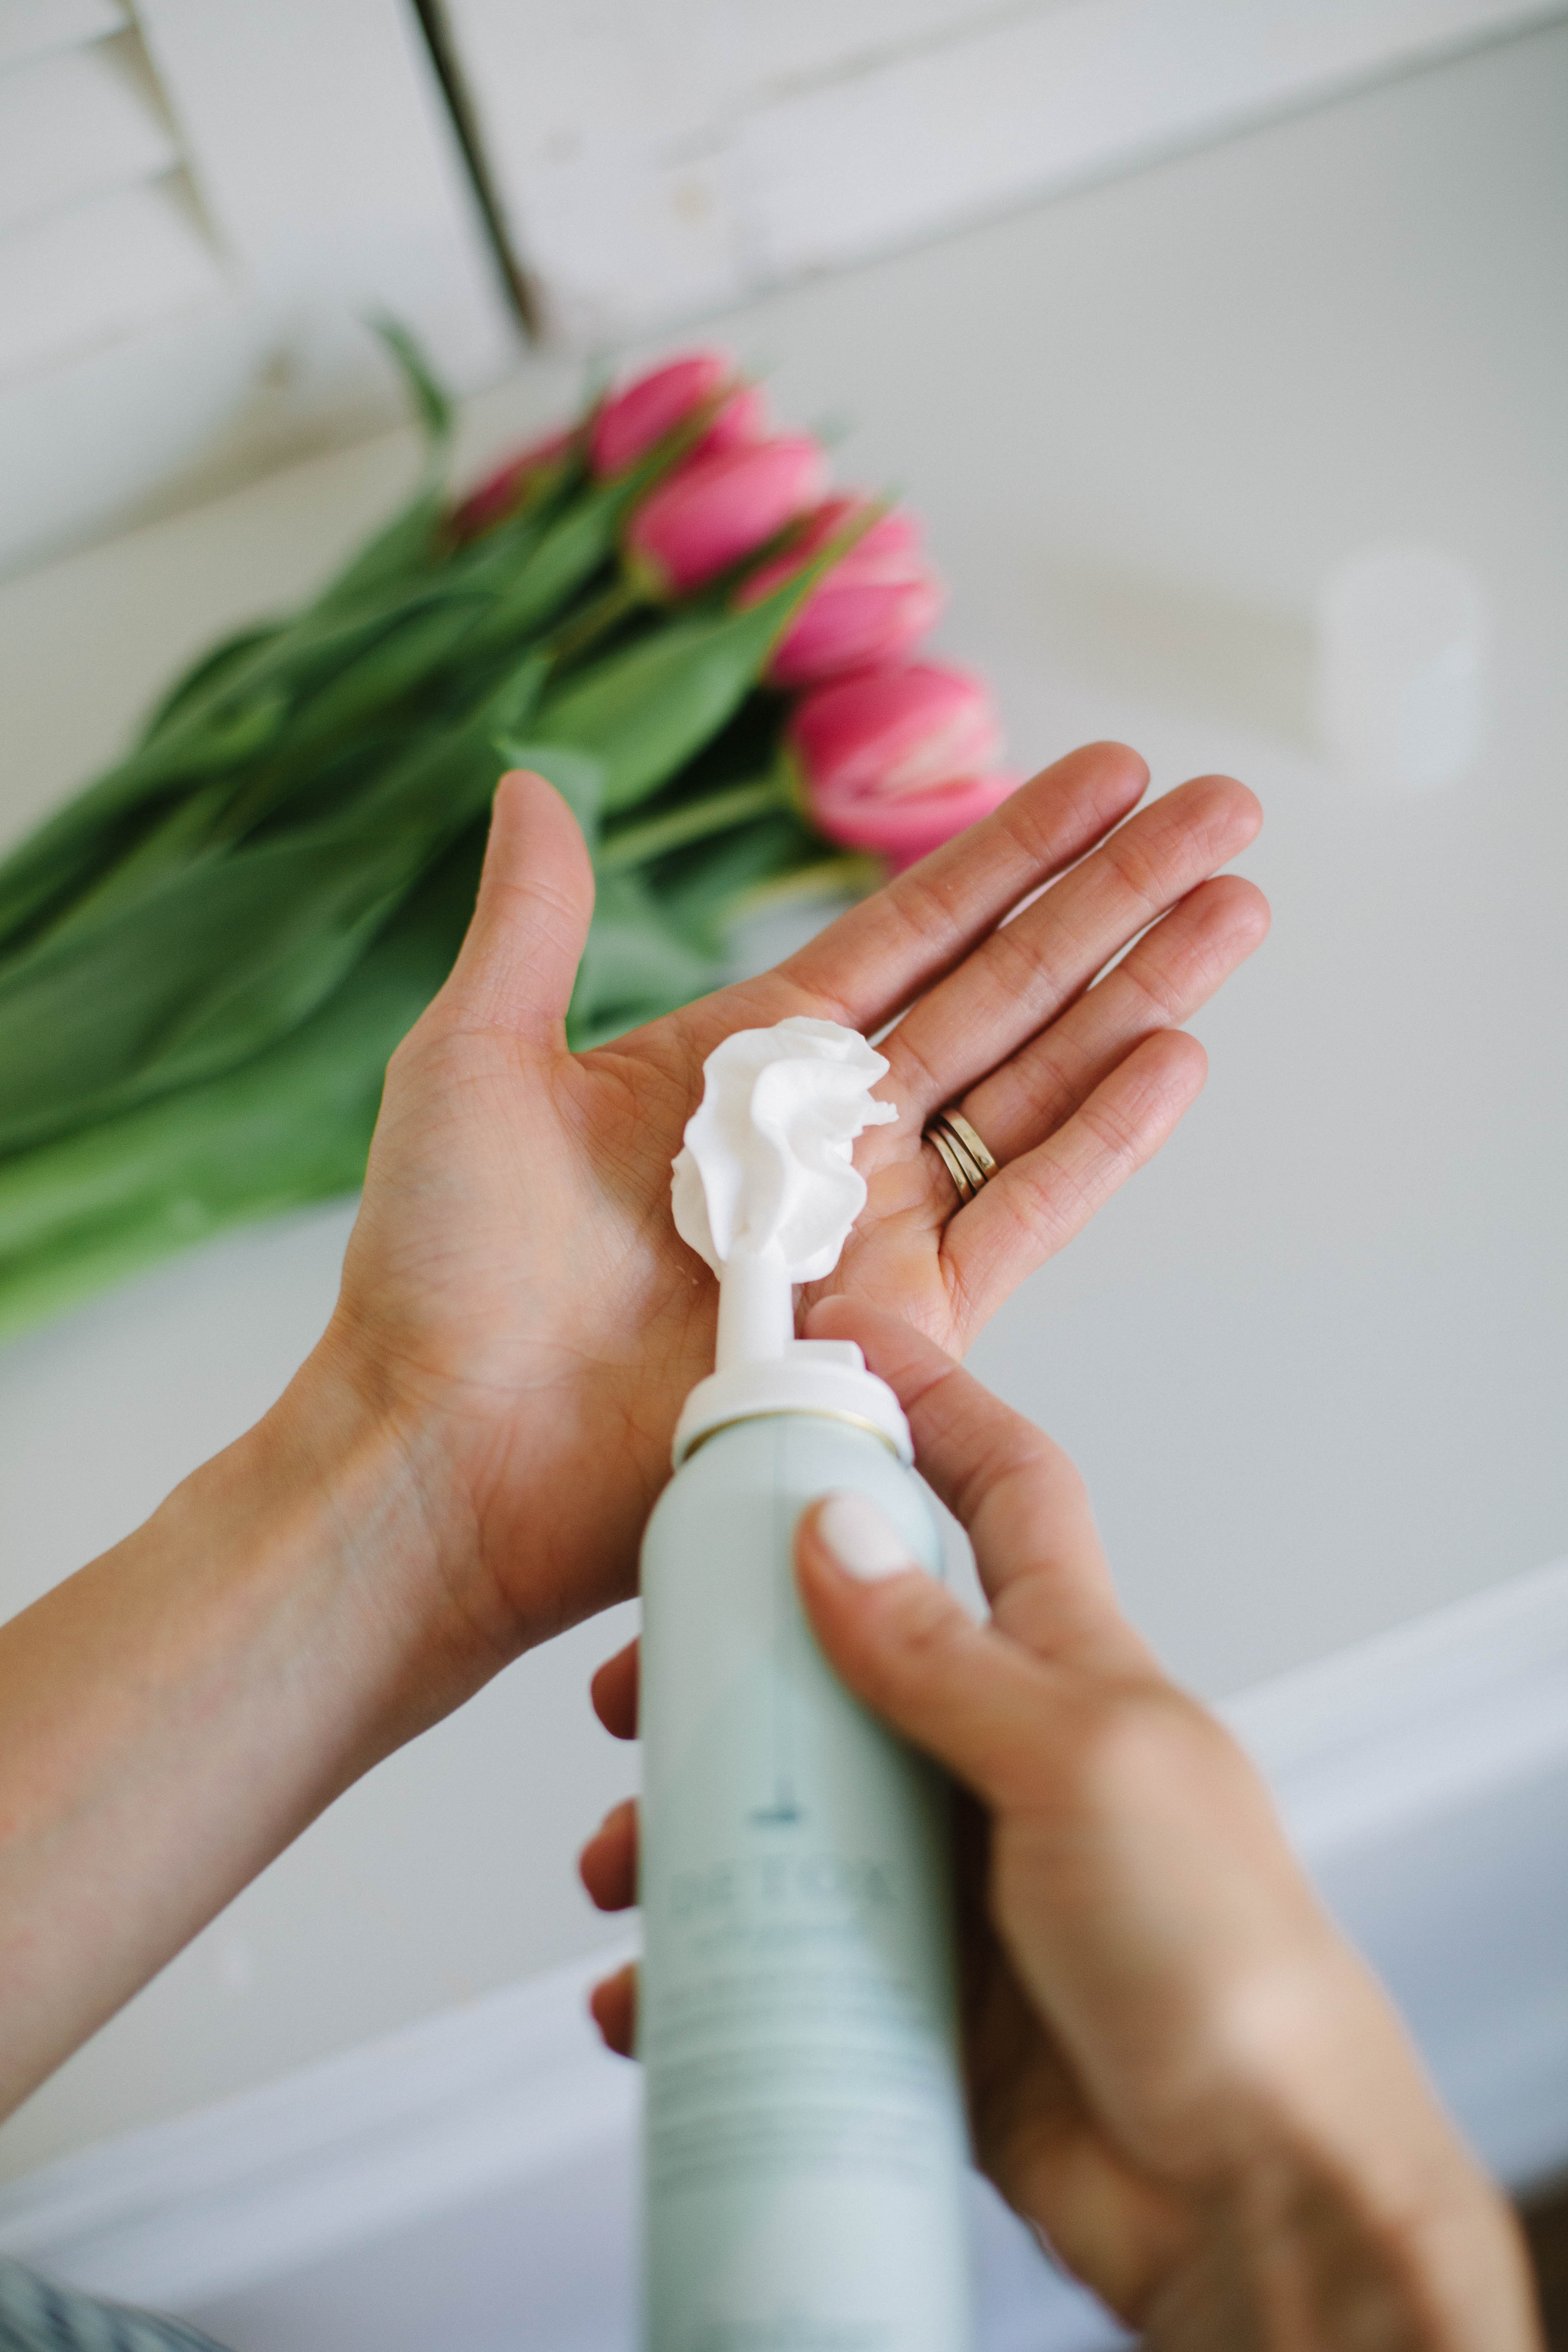 Busy mom? No time for hair? These easy hairstyles for moms are perfect for when time is minimal! This dry shampoo from DryBar helps extend your style on the days you don't feel like washing your hair!